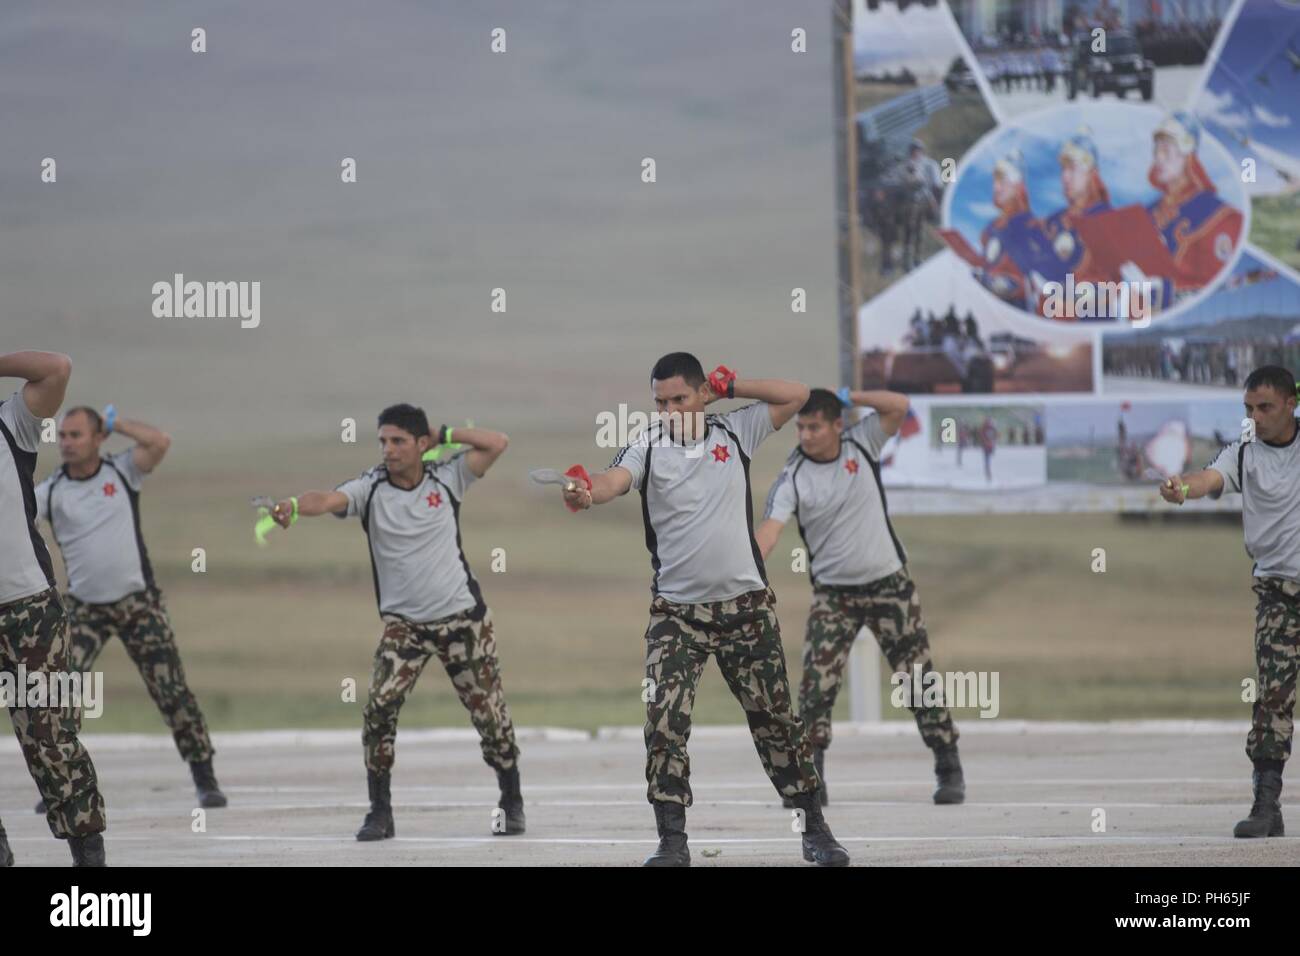 Nepal Army Soldiers perform a routine with their Kukri knife, June 24, 2018, during their Nepal Army Soldiers perform contemporary dance June 24, 2018, during their nation’s cultural event, which is a part of Khaan Quest 2018 at Five Hills Training Area, Mongolia. Khaan Quest is a combined (multinational) joint (multi-service) training exercise designed to strengthen the capabilities of U.S., Mongolian and other partner nations in international peace suppnation’s cultural event, which is a part of Khaan Quest 2018 at Five Hills Training Area, Mongolia. Khaan Quest is a combined (multinational) Stock Photo